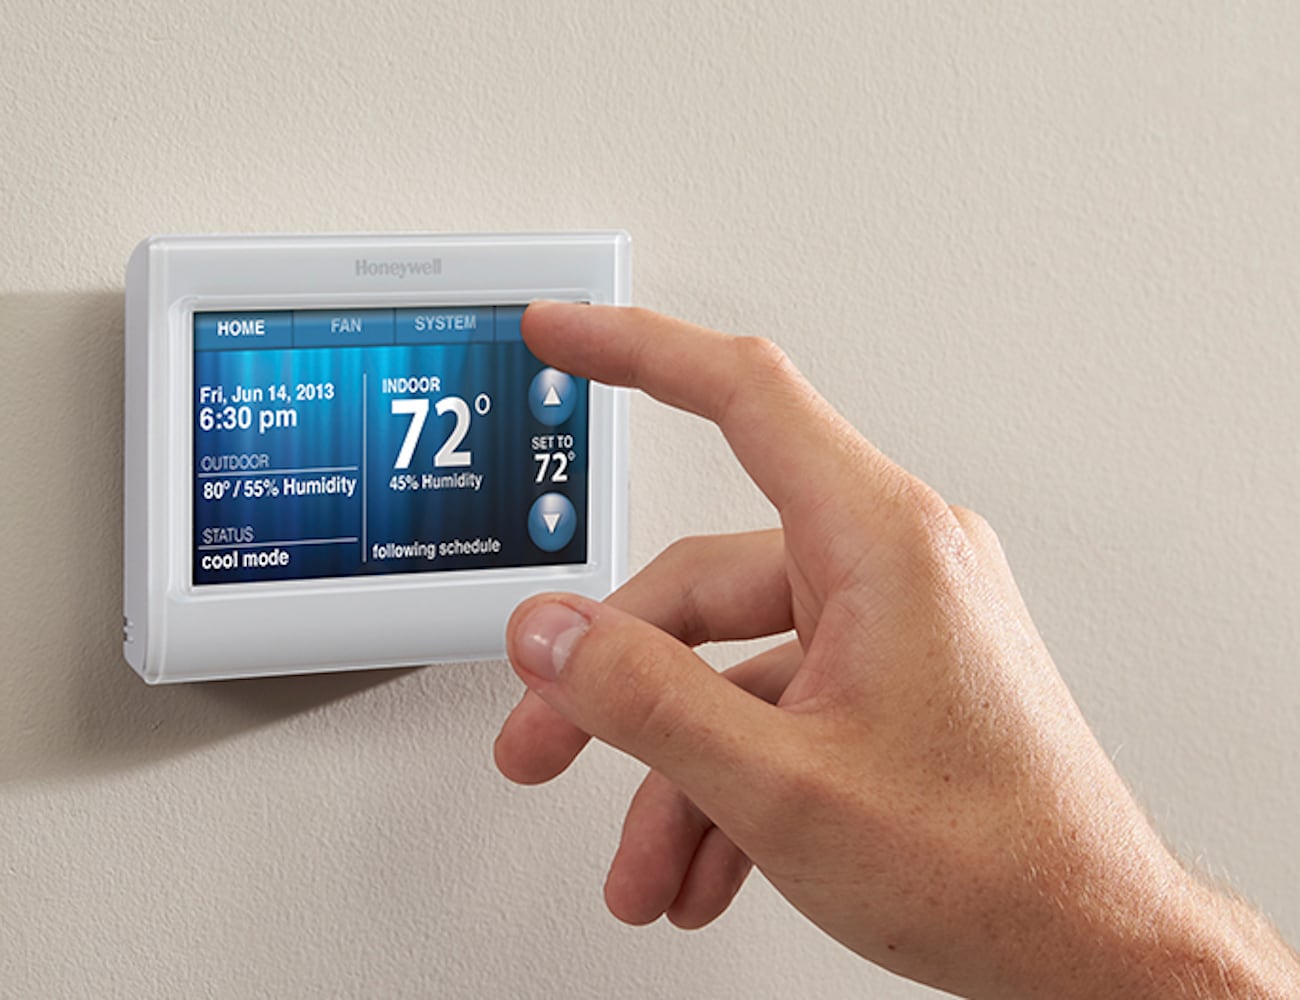 How To Operate A Honeywell Programmable Thermostat